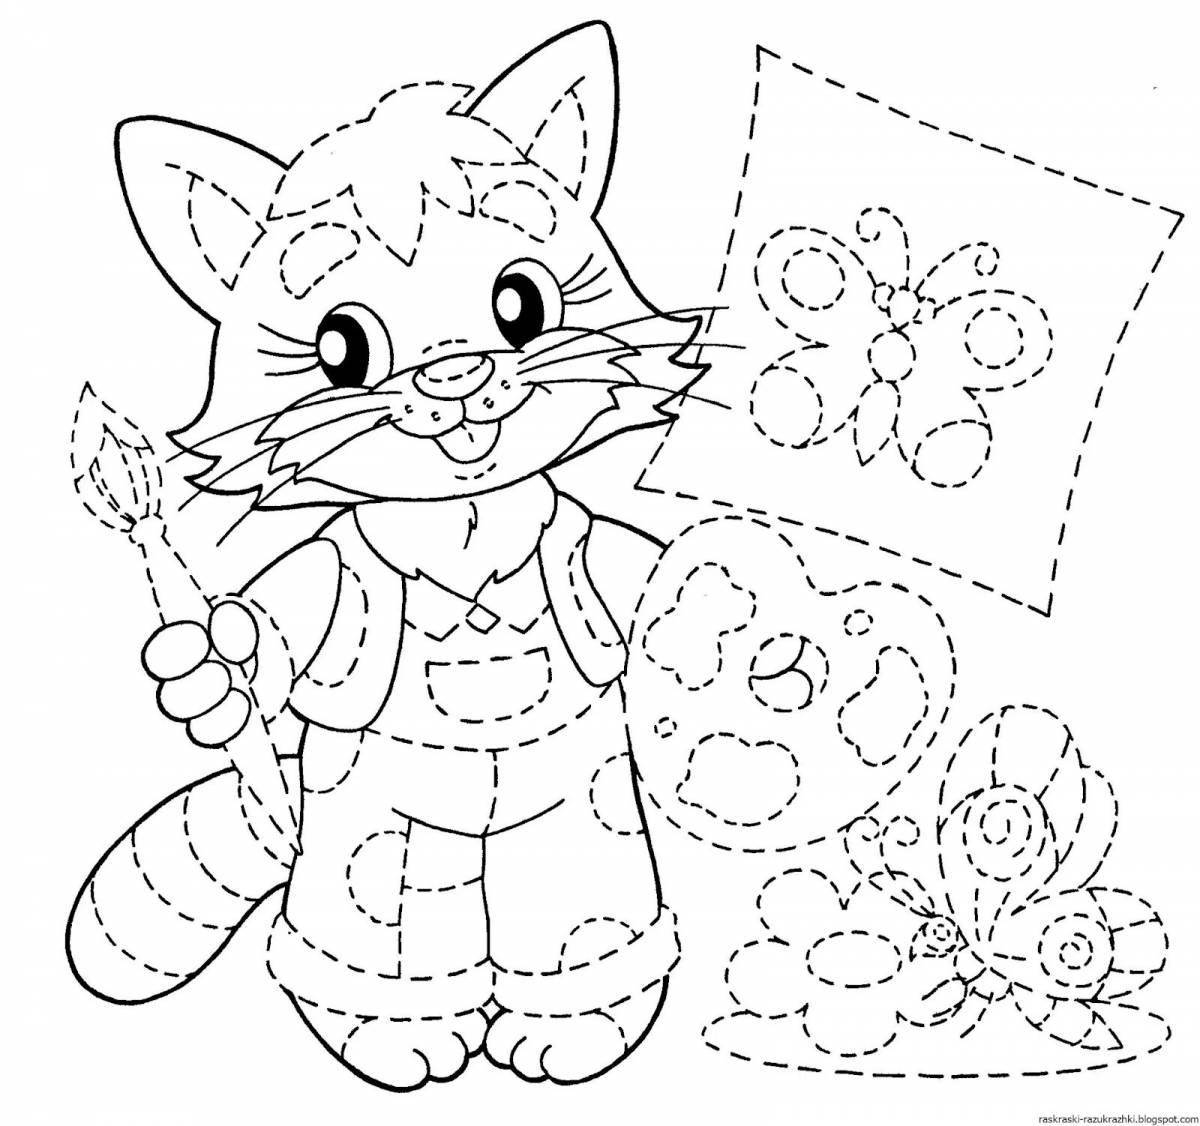 Bright coloring for children 4-5 years old learning and development